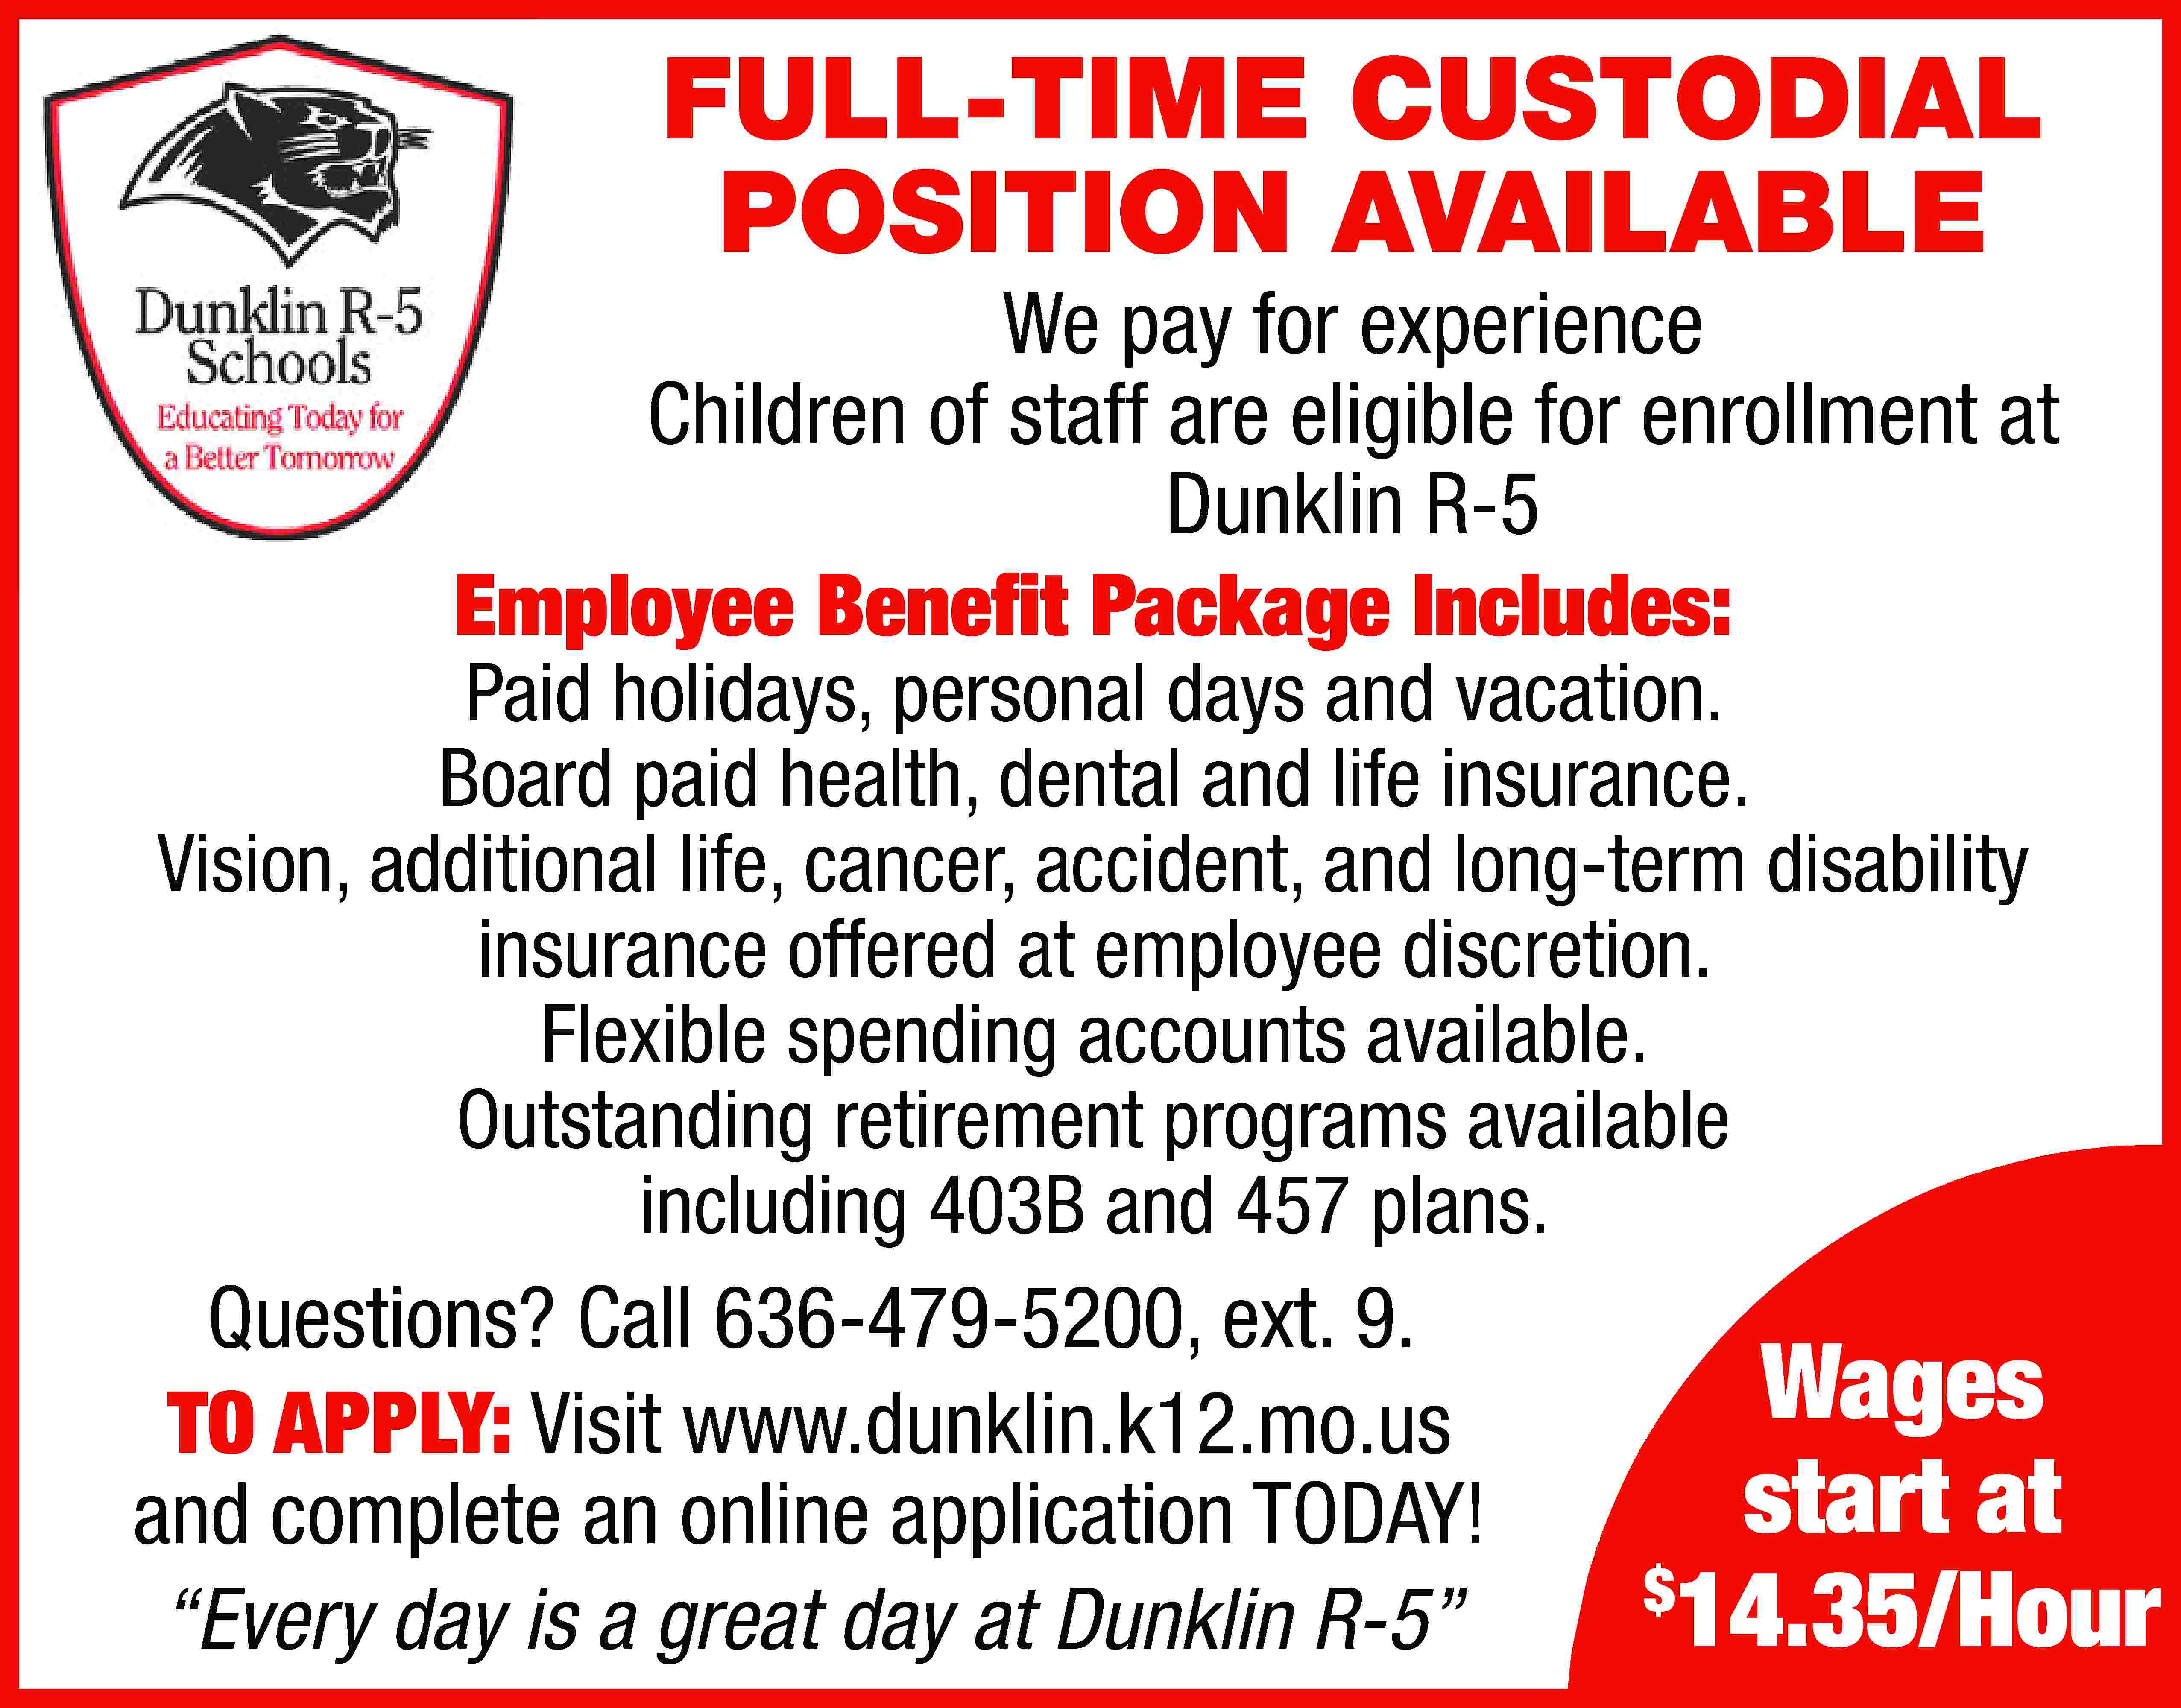 FULL-TIME CUSTODIAL POSITION AVAILABLE We  FULL-TIME CUSTODIAL POSITION AVAILABLE We pay for experience Children of staff are eligible for enrollment at Dunklin R-5 Employee Benefit Package Includes: Paid holidays, personal days and vacation. Board paid health, dental and life insurance. Vision, additional life, cancer, accident, and long-term disability insurance offered at employee discretion. Flexible spending accounts available. Outstanding retirement programs available including 403B and 457 plans. Questions? Call 636-479-5200, ext. 9. TO APPLY: Visit www.dunklin.k12.mo.us and complete an online application TODAY! “Every day is a great day at Dunklin R-5” Wages start at $ 14.35/Hour